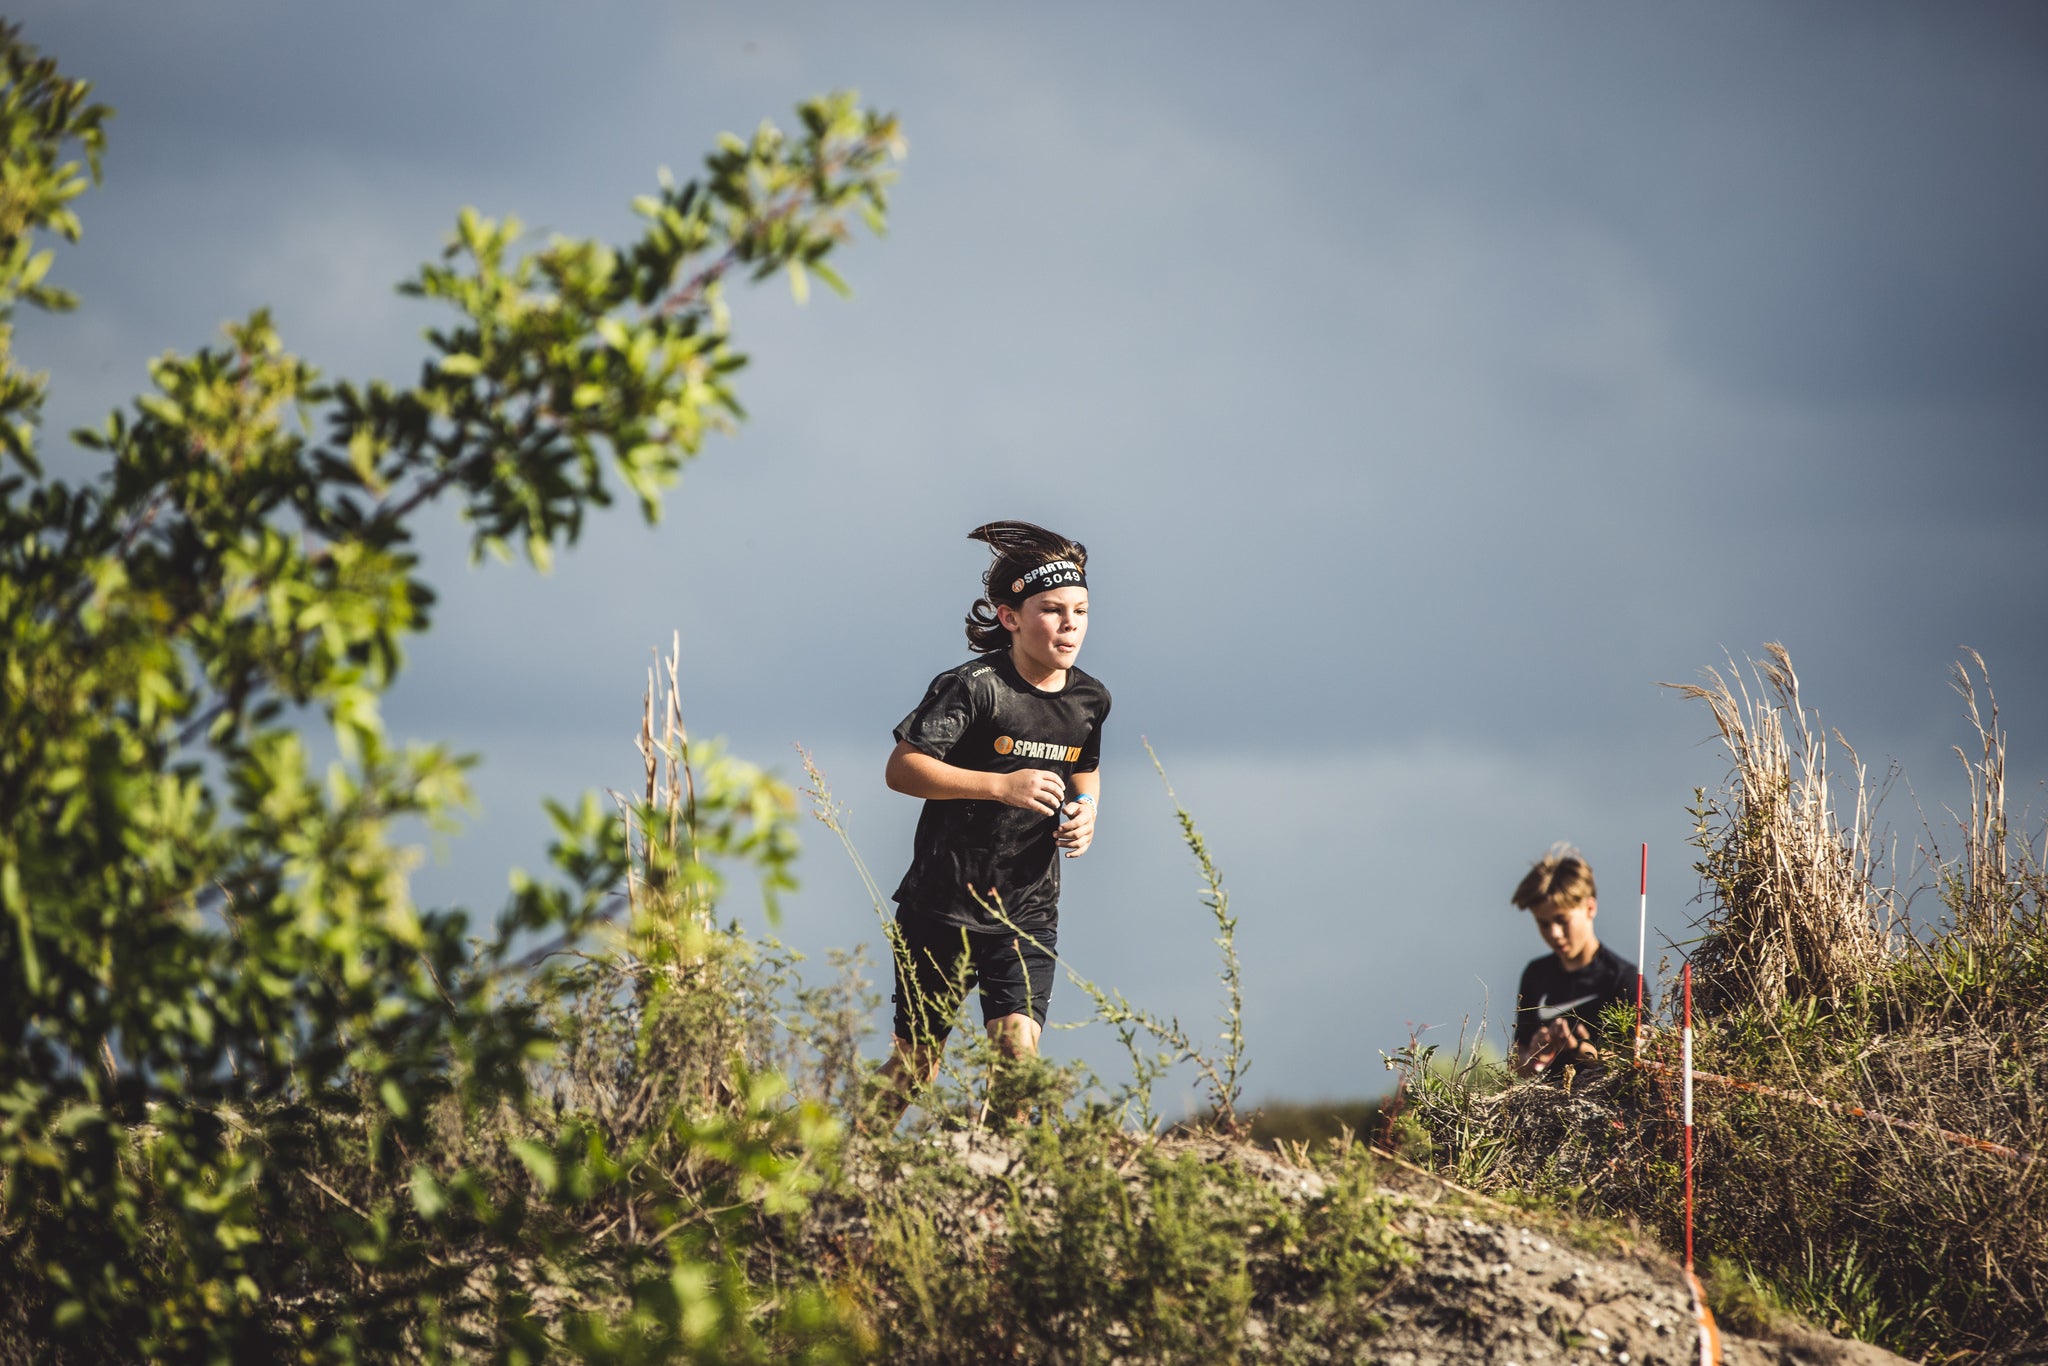 a racer competing at the central florida spartan race